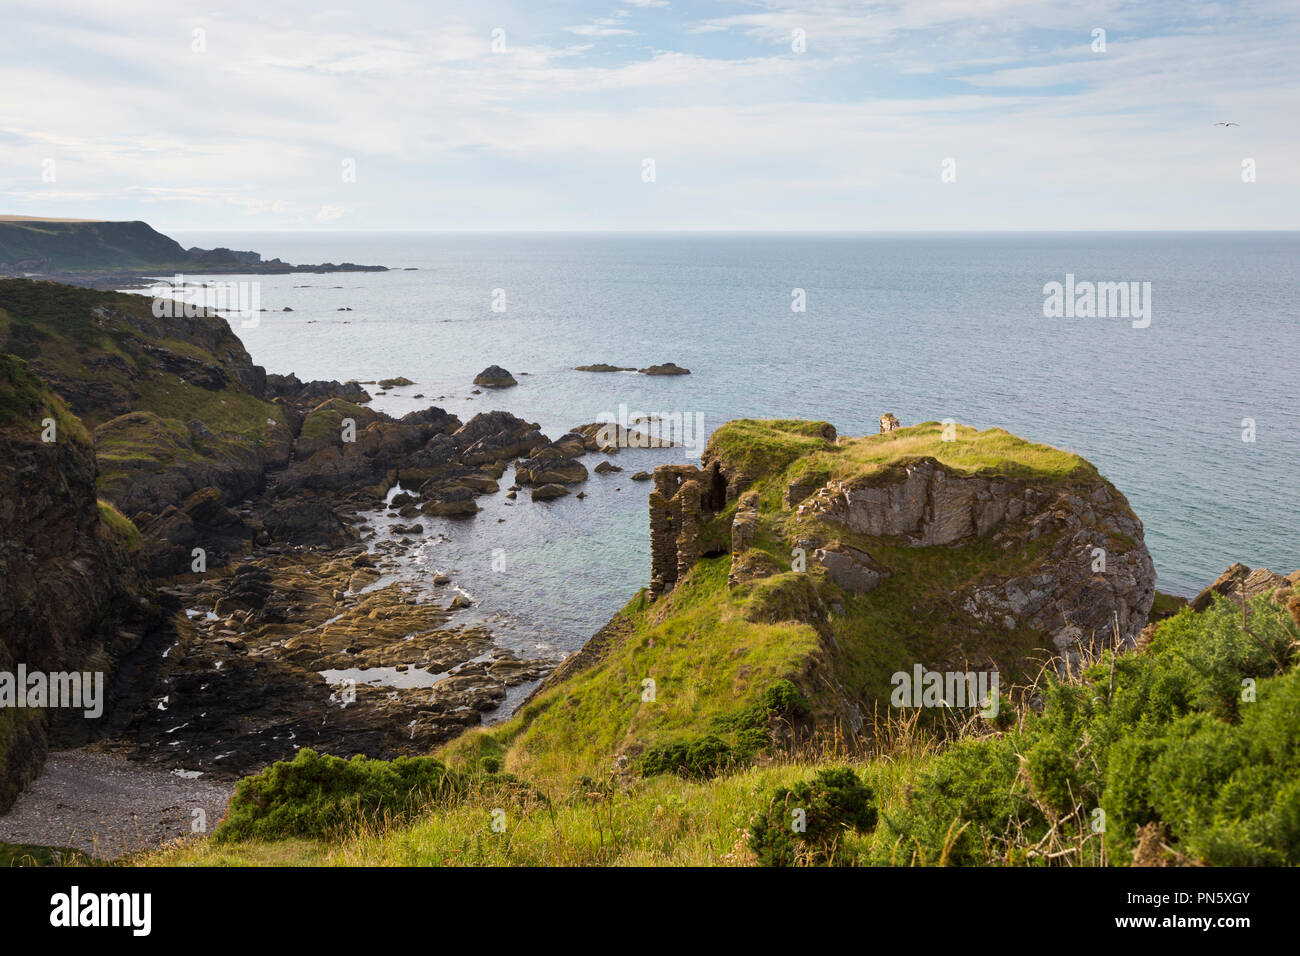 View of Findlater Castle over looking the Moray Firth in Scotland Stock Photo